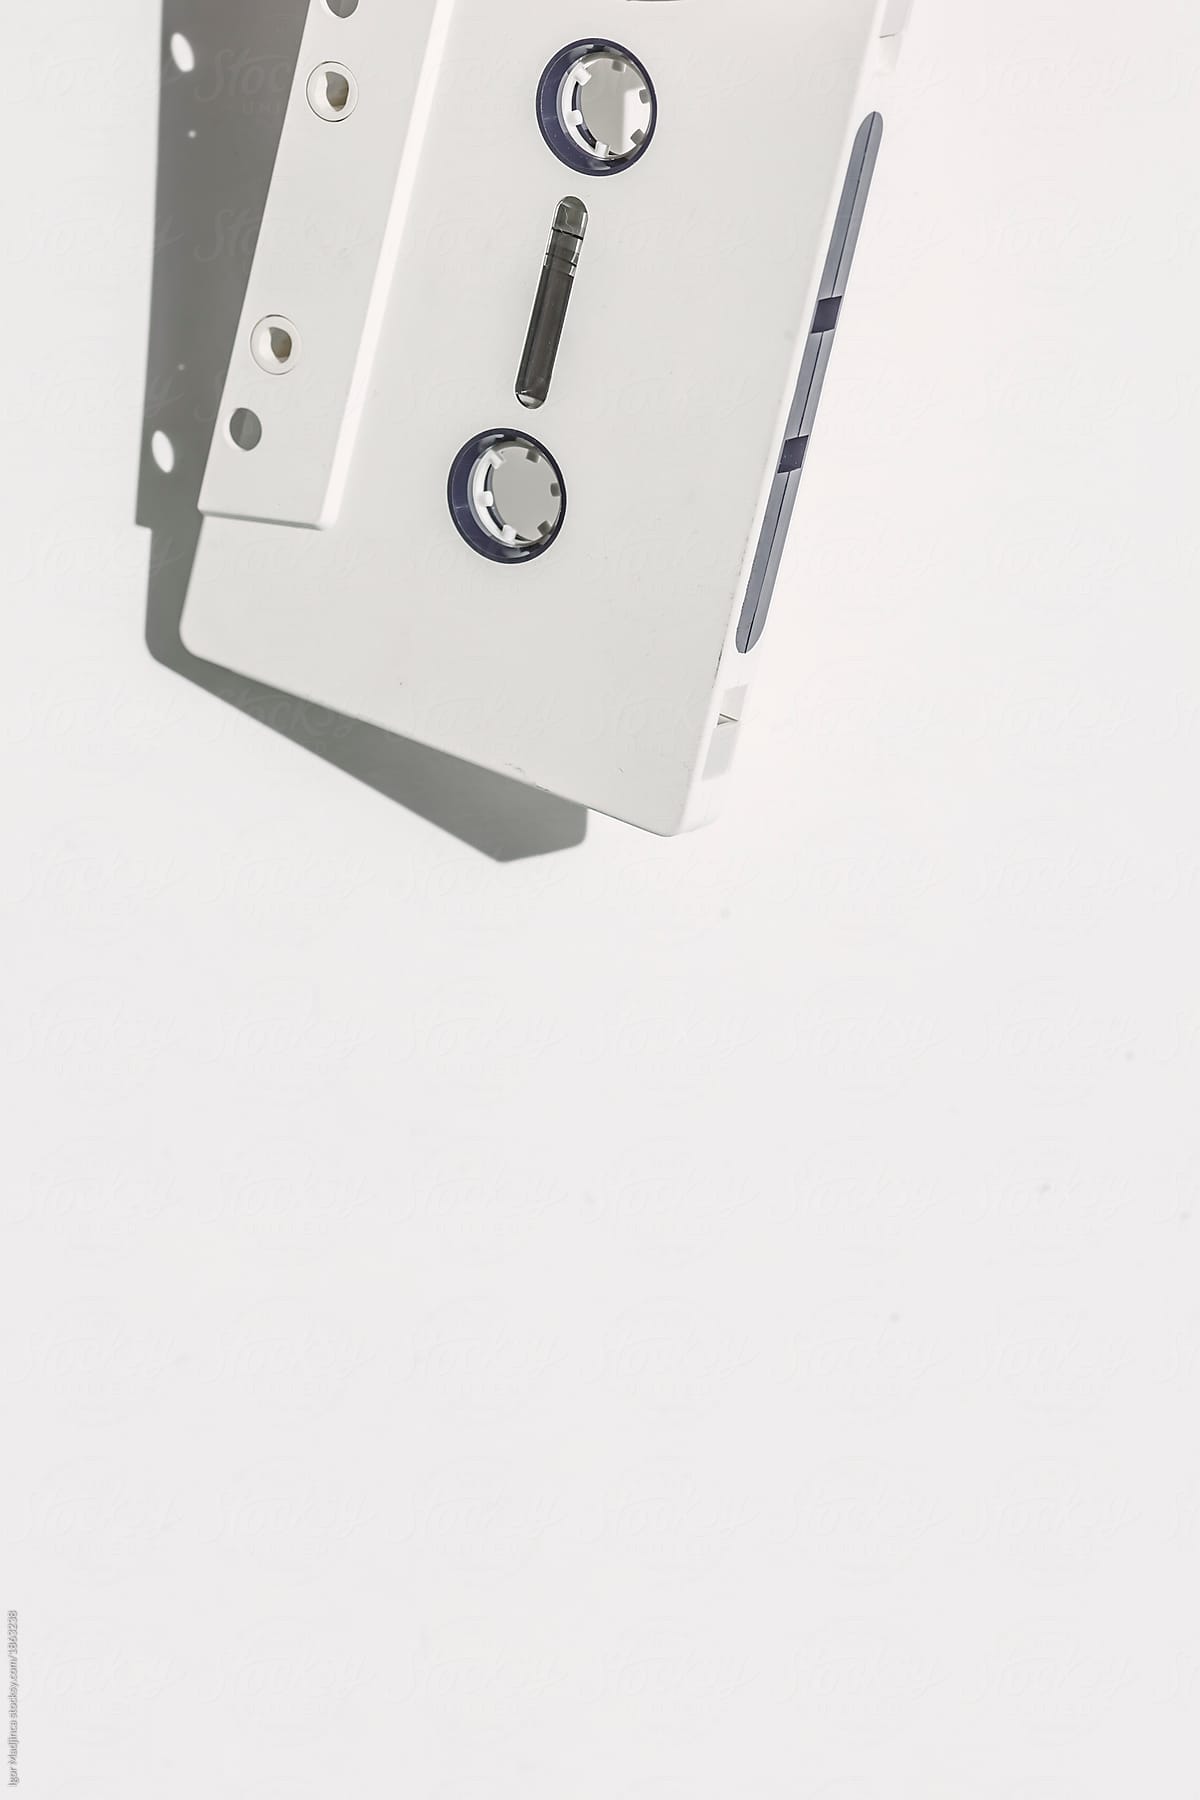 audio,tape,music,song,sound,minimal,format,information,white,party,pause,play